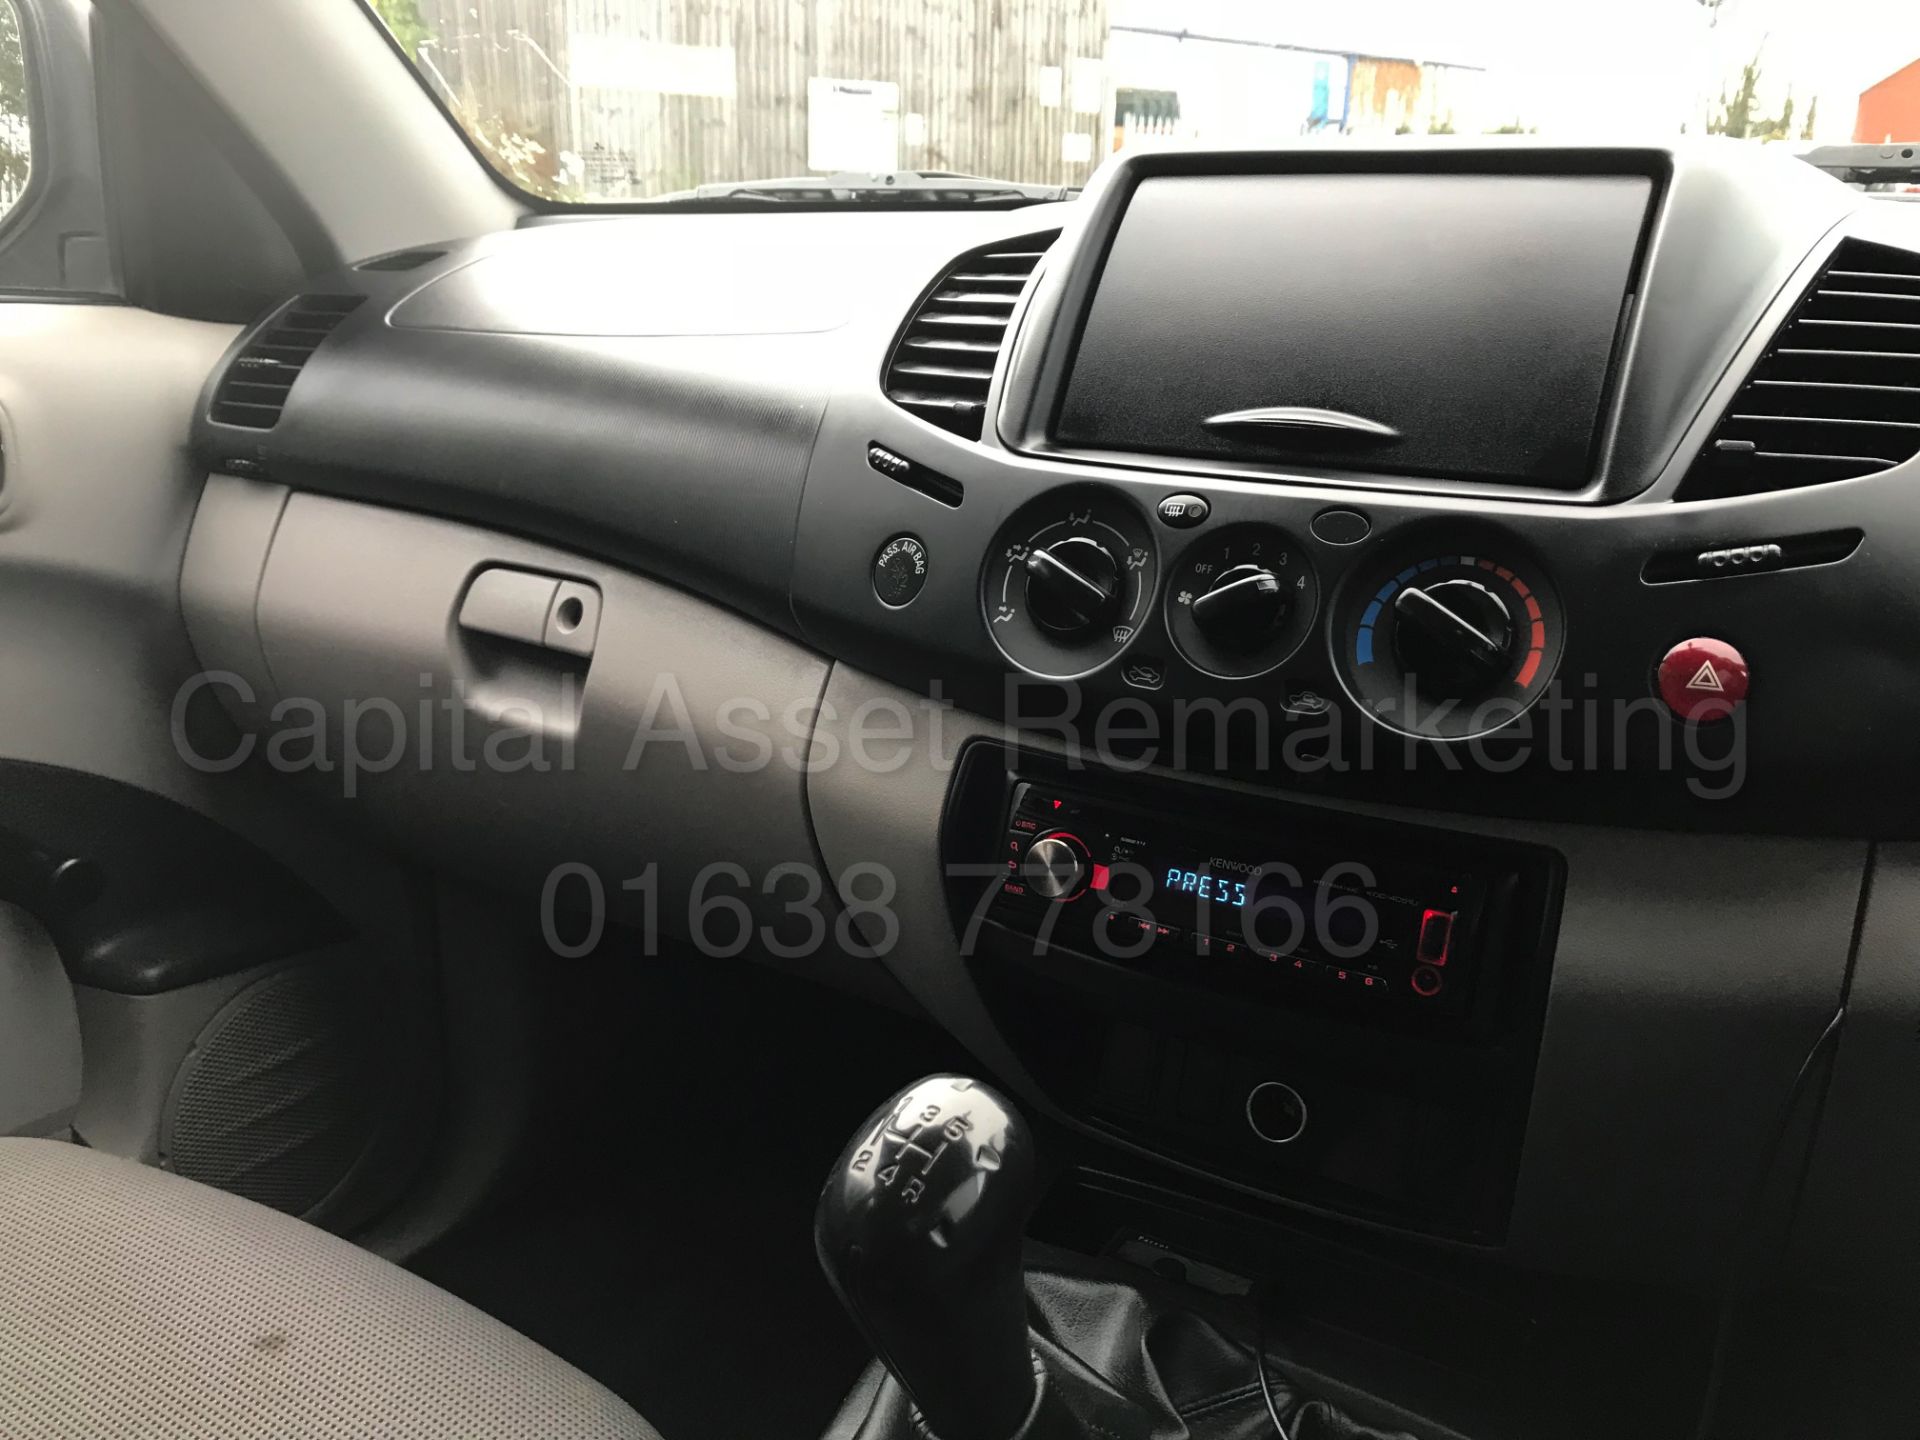 (On Sale) MITSUBISHI L200 DOUBLE CAB PICK-UP (2013 MODEL) '2.5 DI-D - 136 BHP' (1 OWNER) *31K MILES* - Image 22 of 26